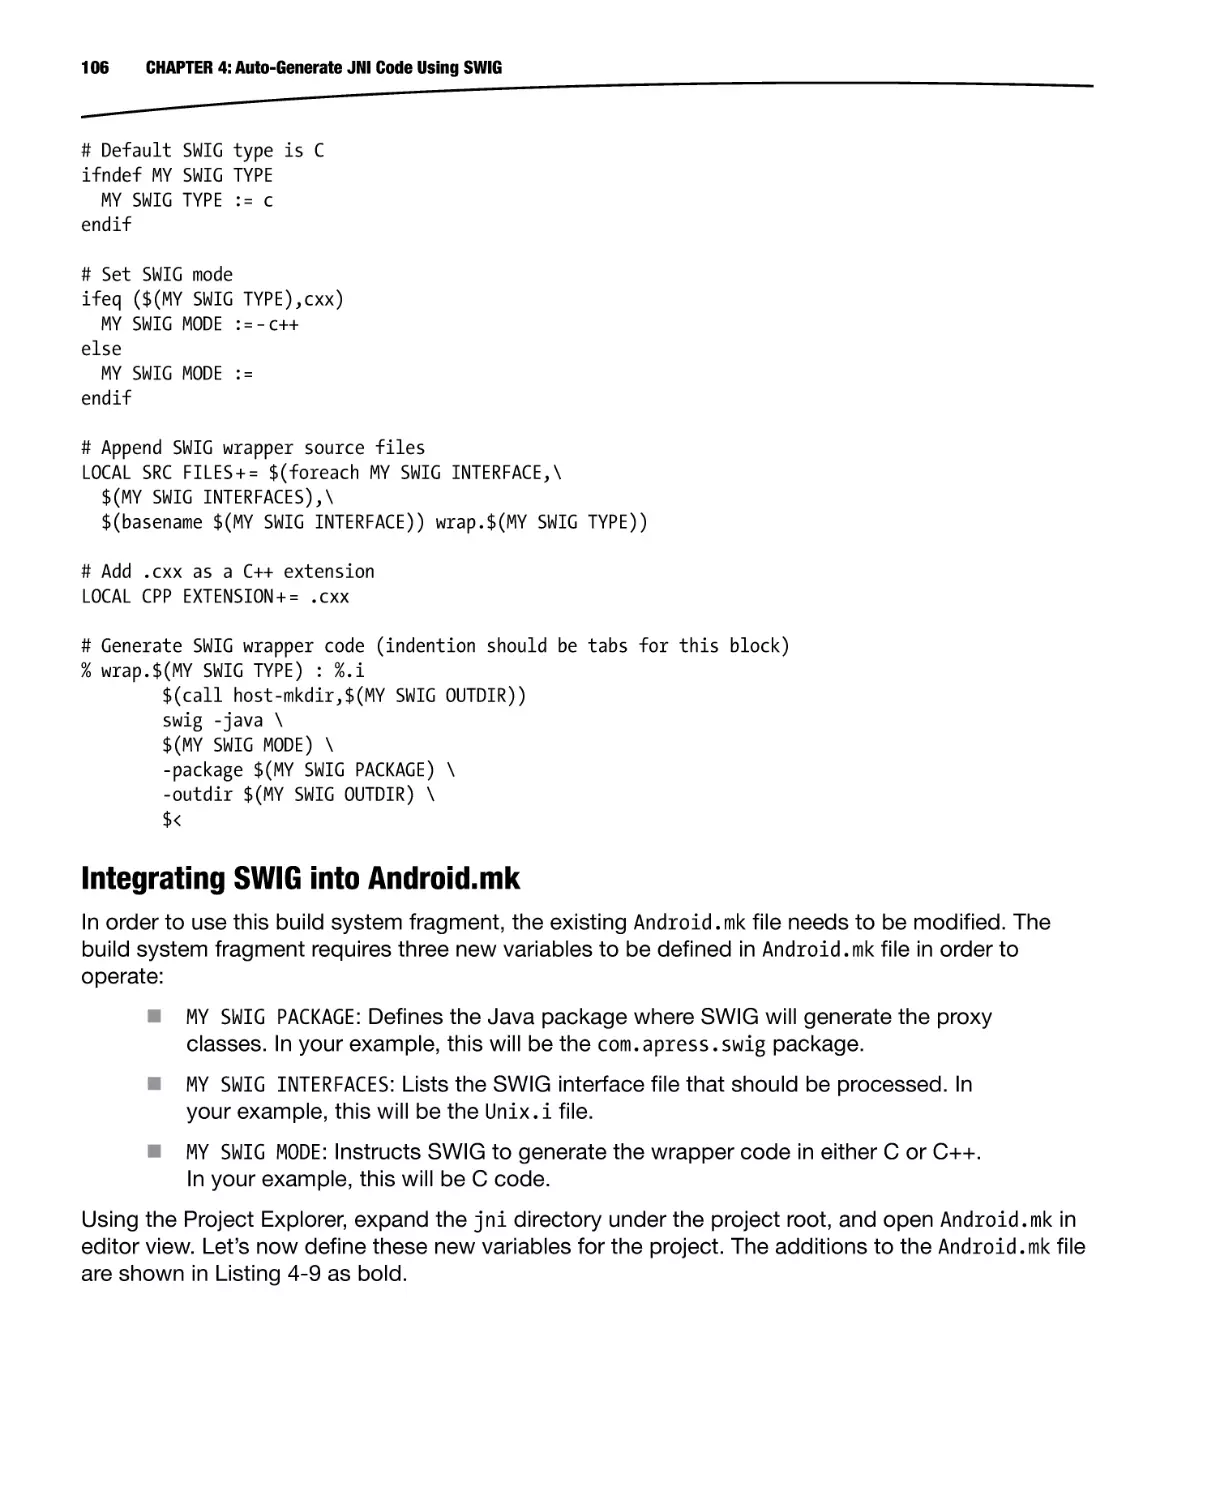 Integrating SWIG into Android.mk